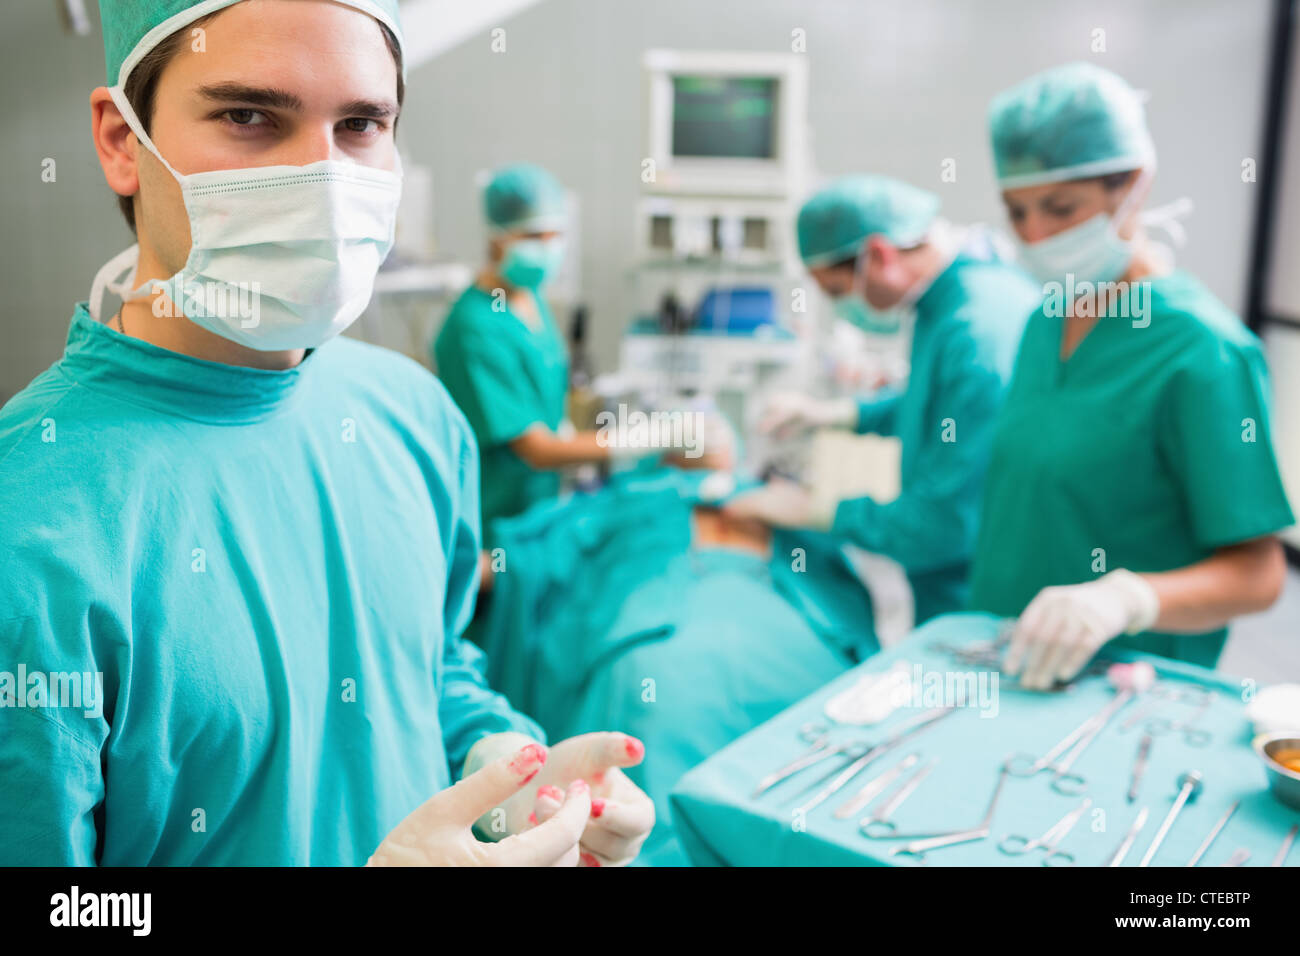 Surgeon wearing bloody gloves while looking at camera Stock Photo